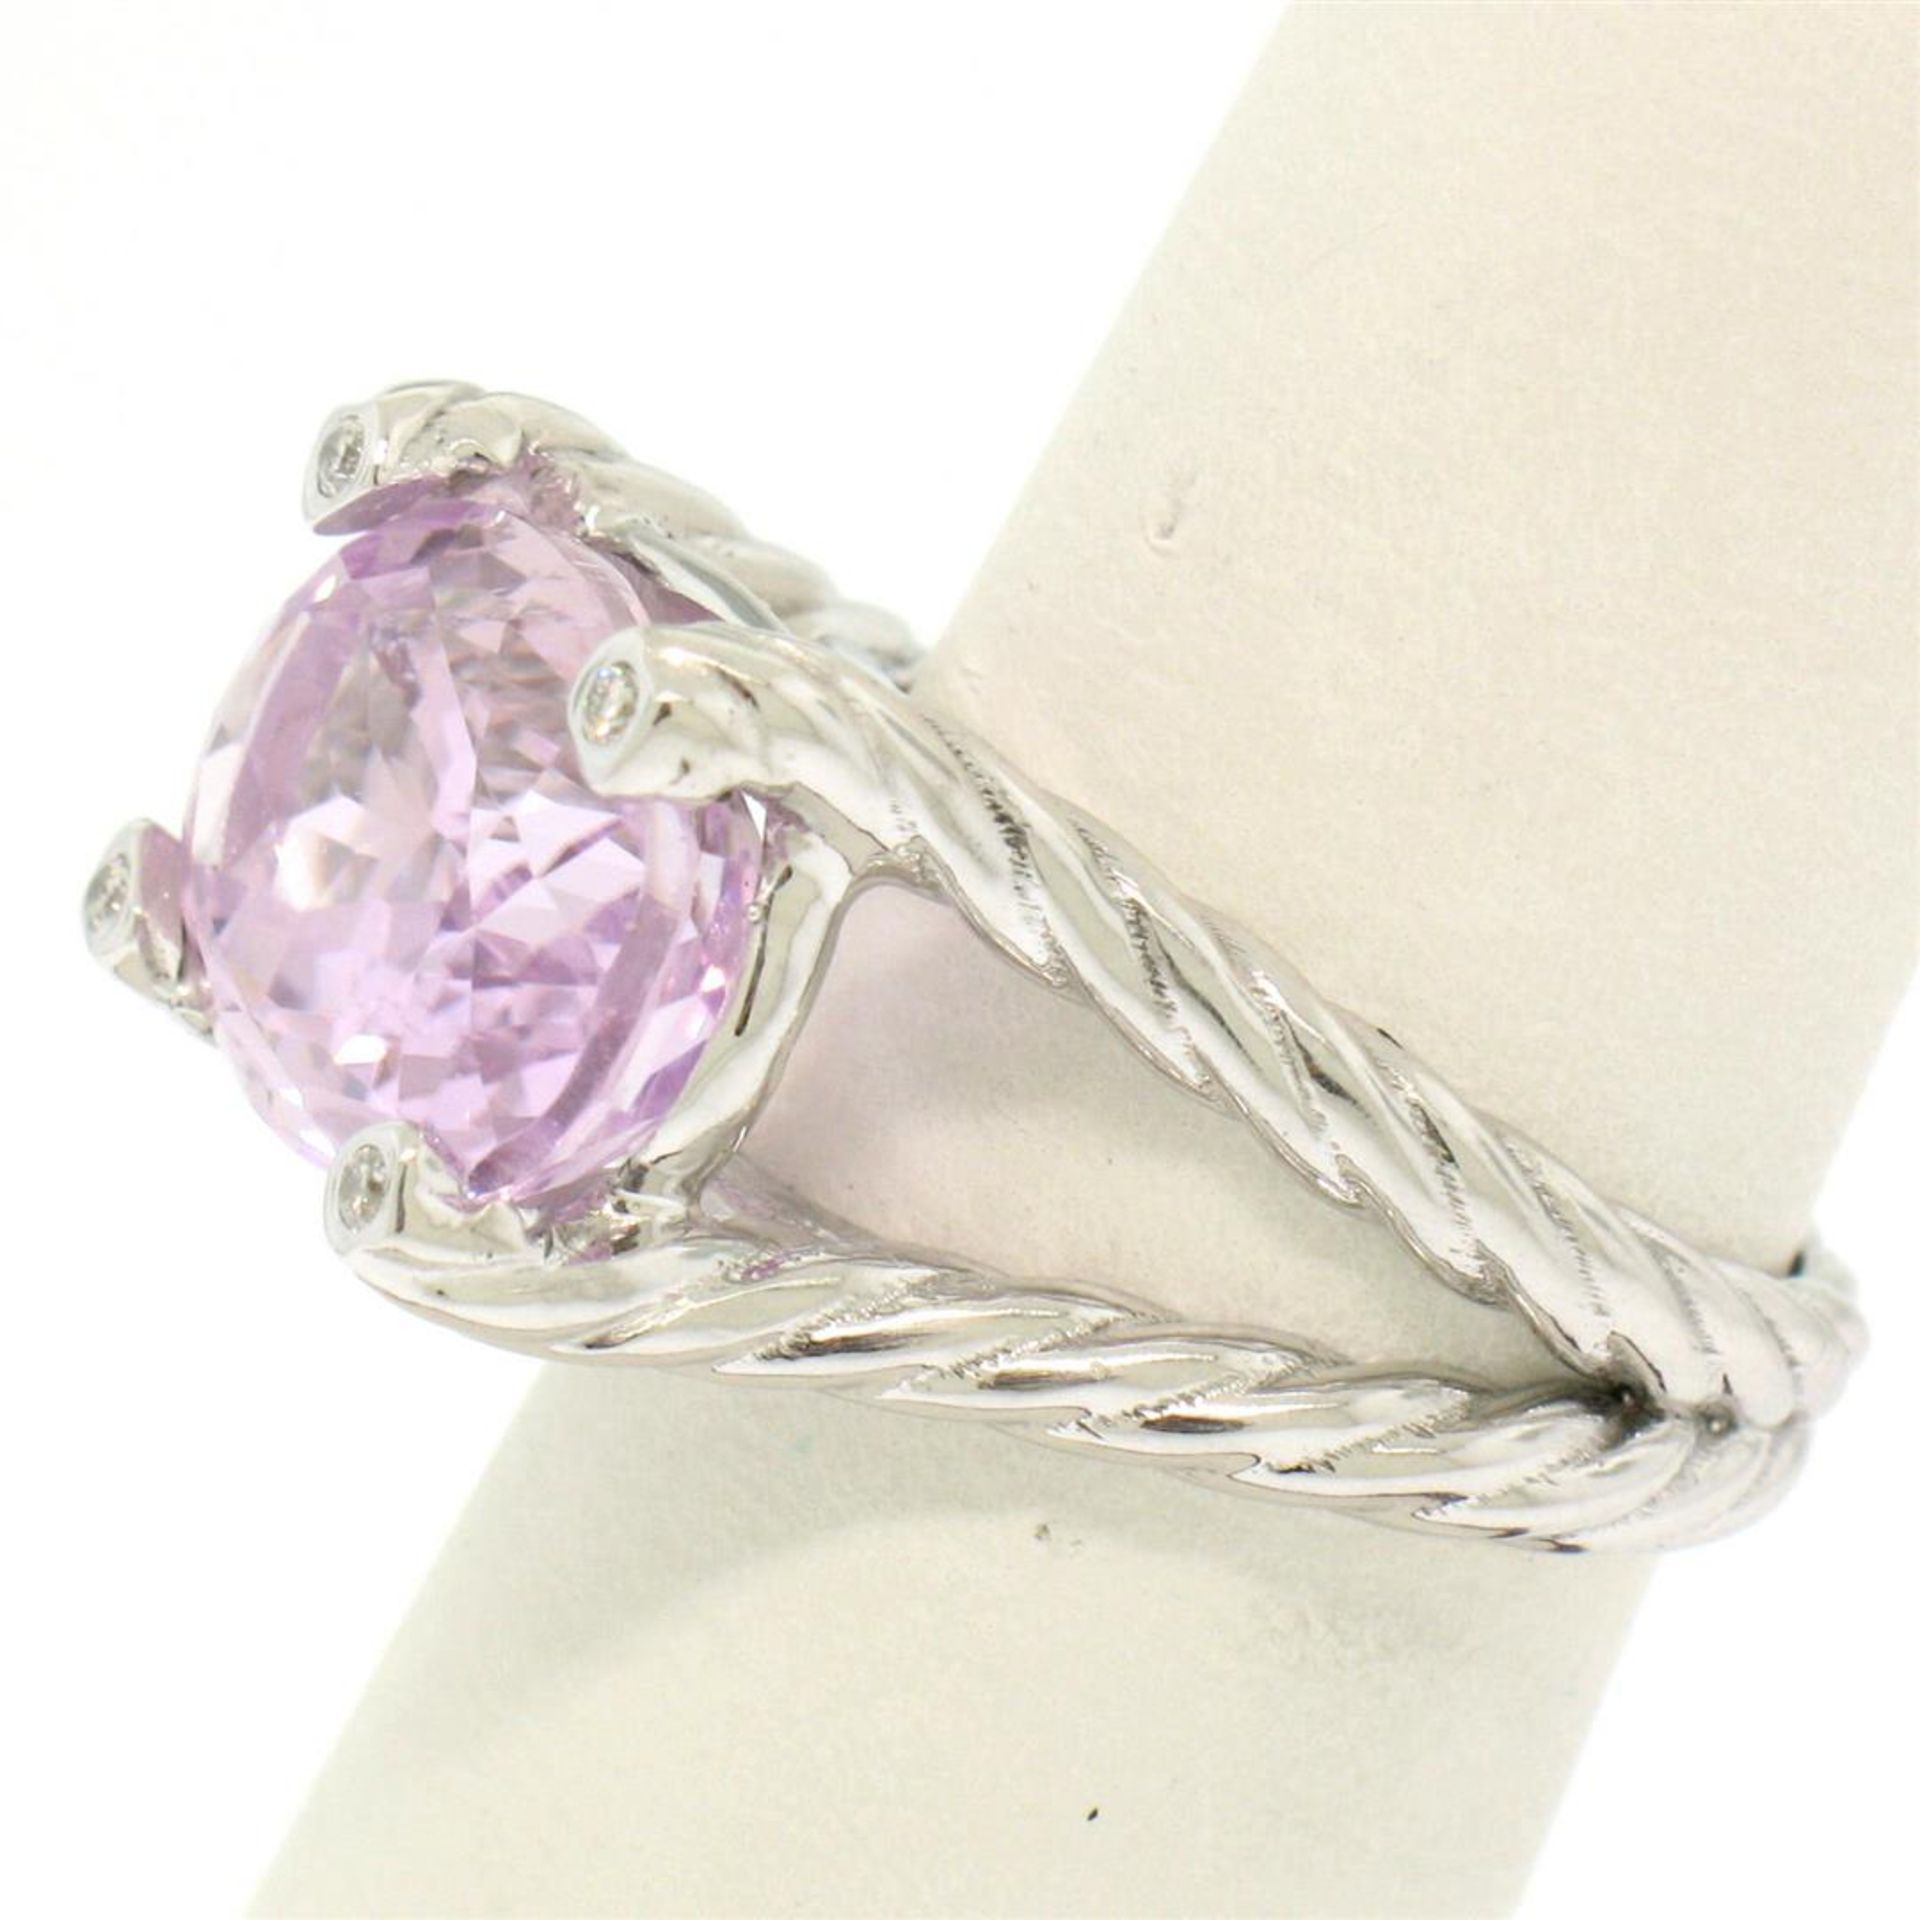 14k White Gold Twisted Cable 8.5 ct Oval Kunzite Solitaire Ring 4 Diamond Accent - Image 2 of 8